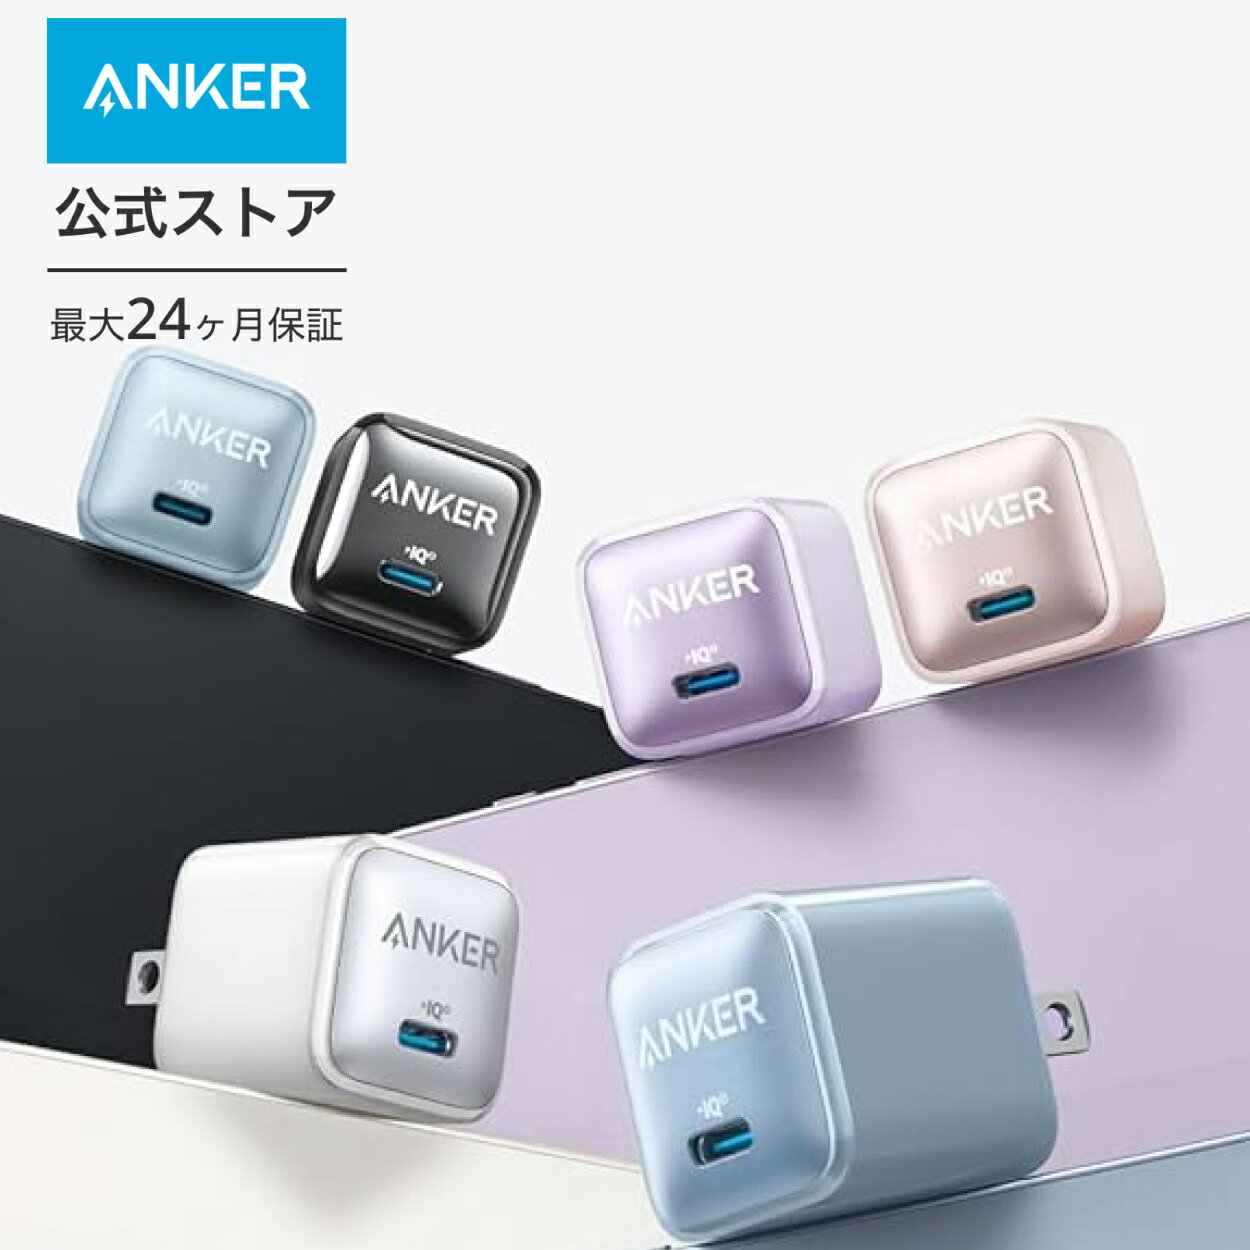 Anker Nano Charger (20W) PD 20W USB-C 急速充電器iPhone Android その他各種機器対応